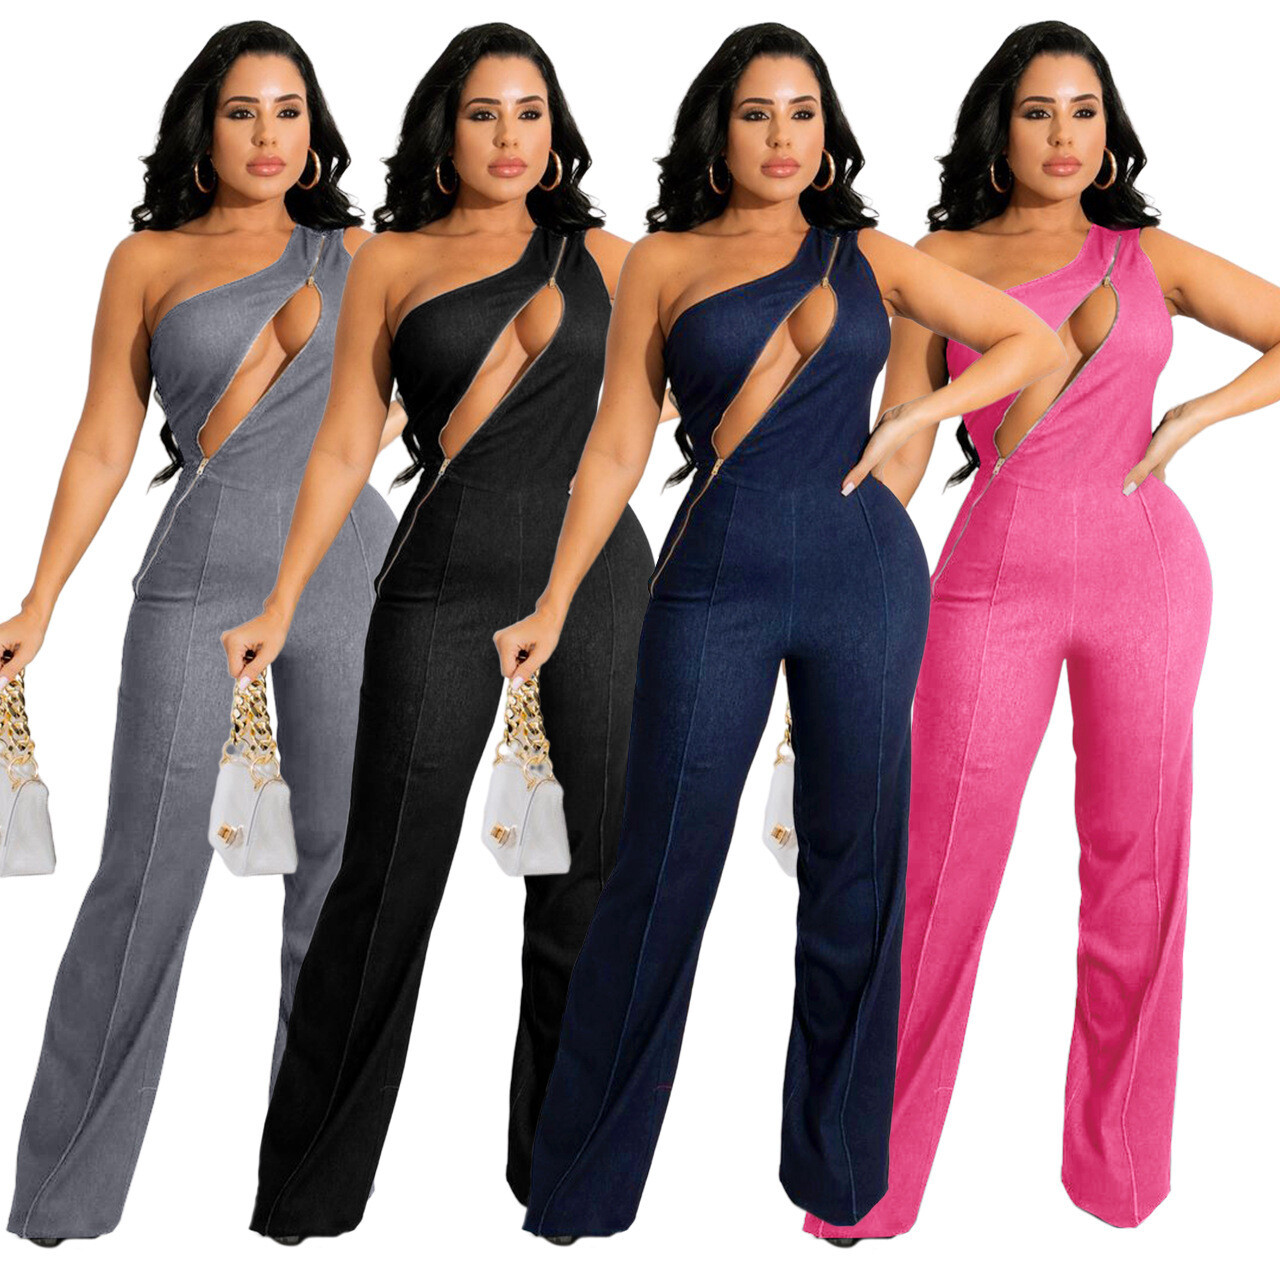 J&H 2022 New fashion sleeveless chest zipper sexy one shoulder wide leg jumpsuits women club party pants suits